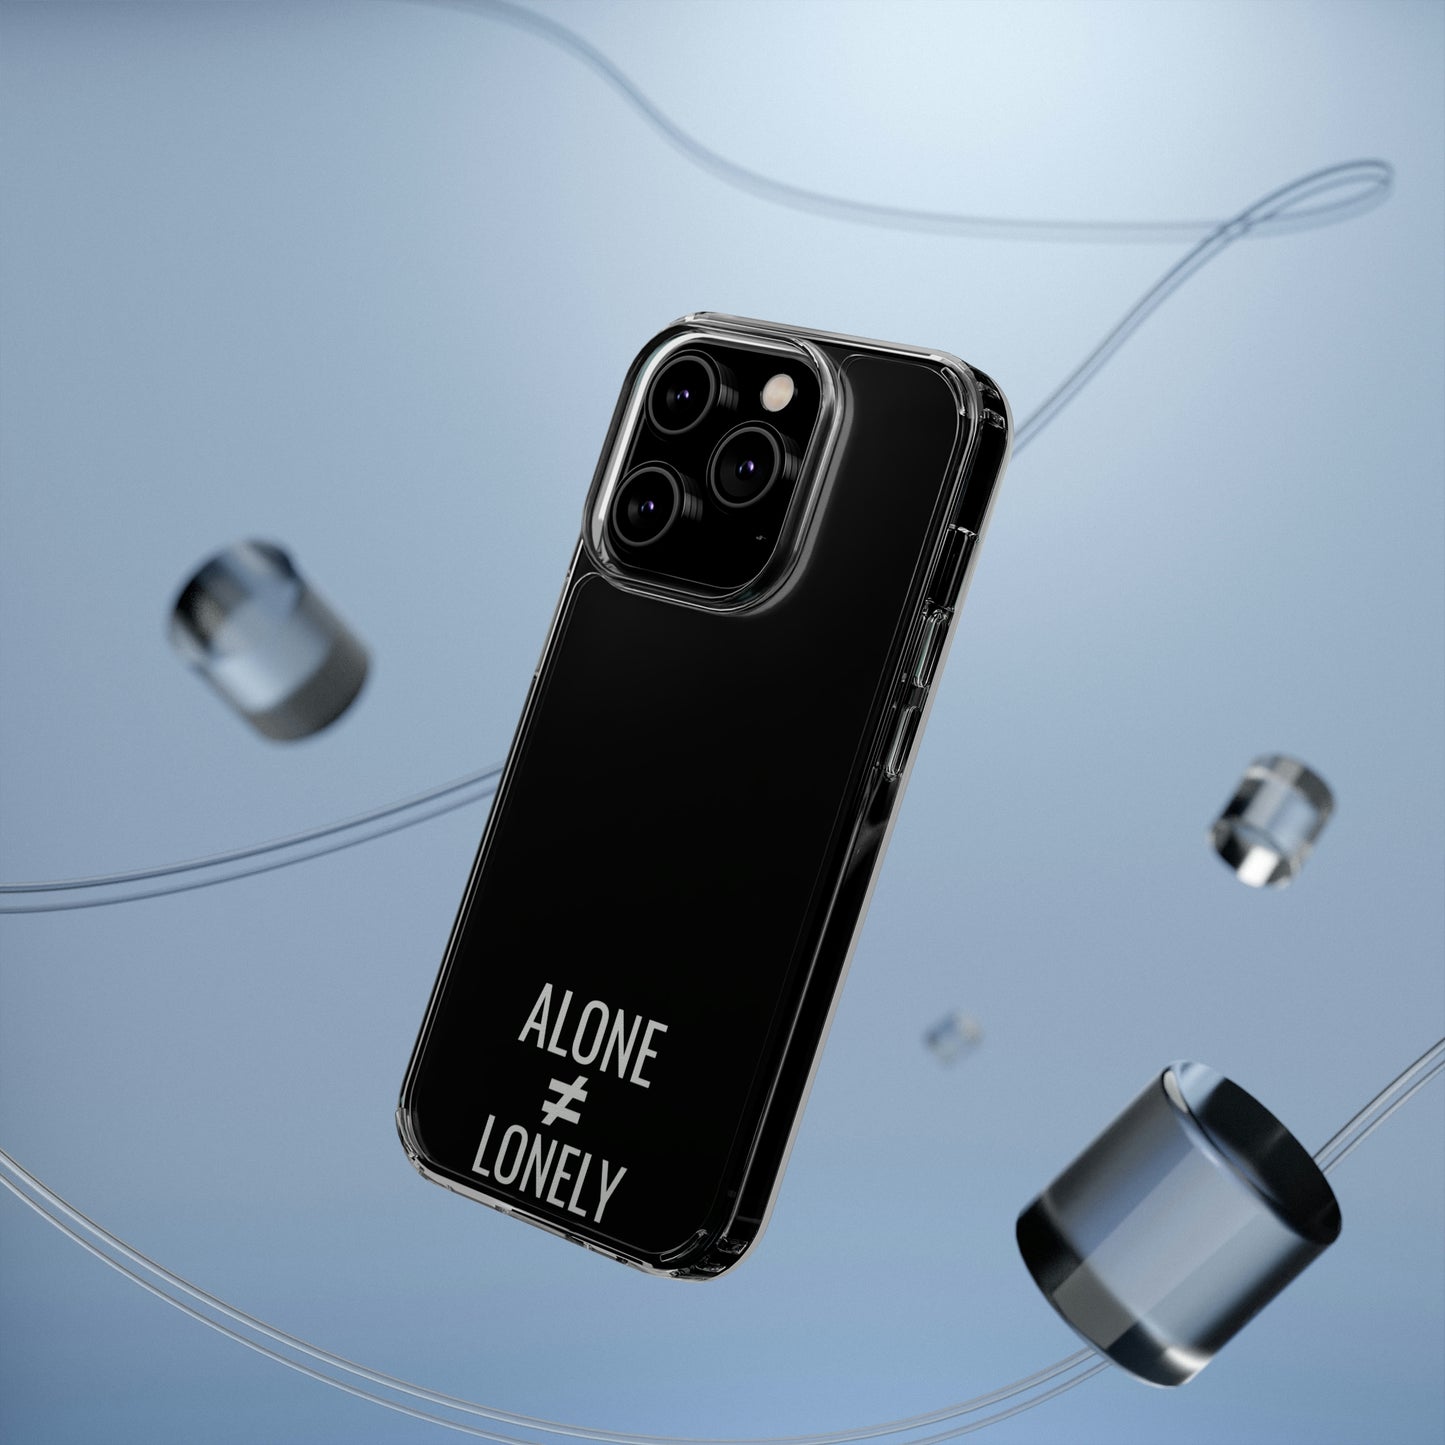 Alone ≠ Lonely Clear Phone Cases